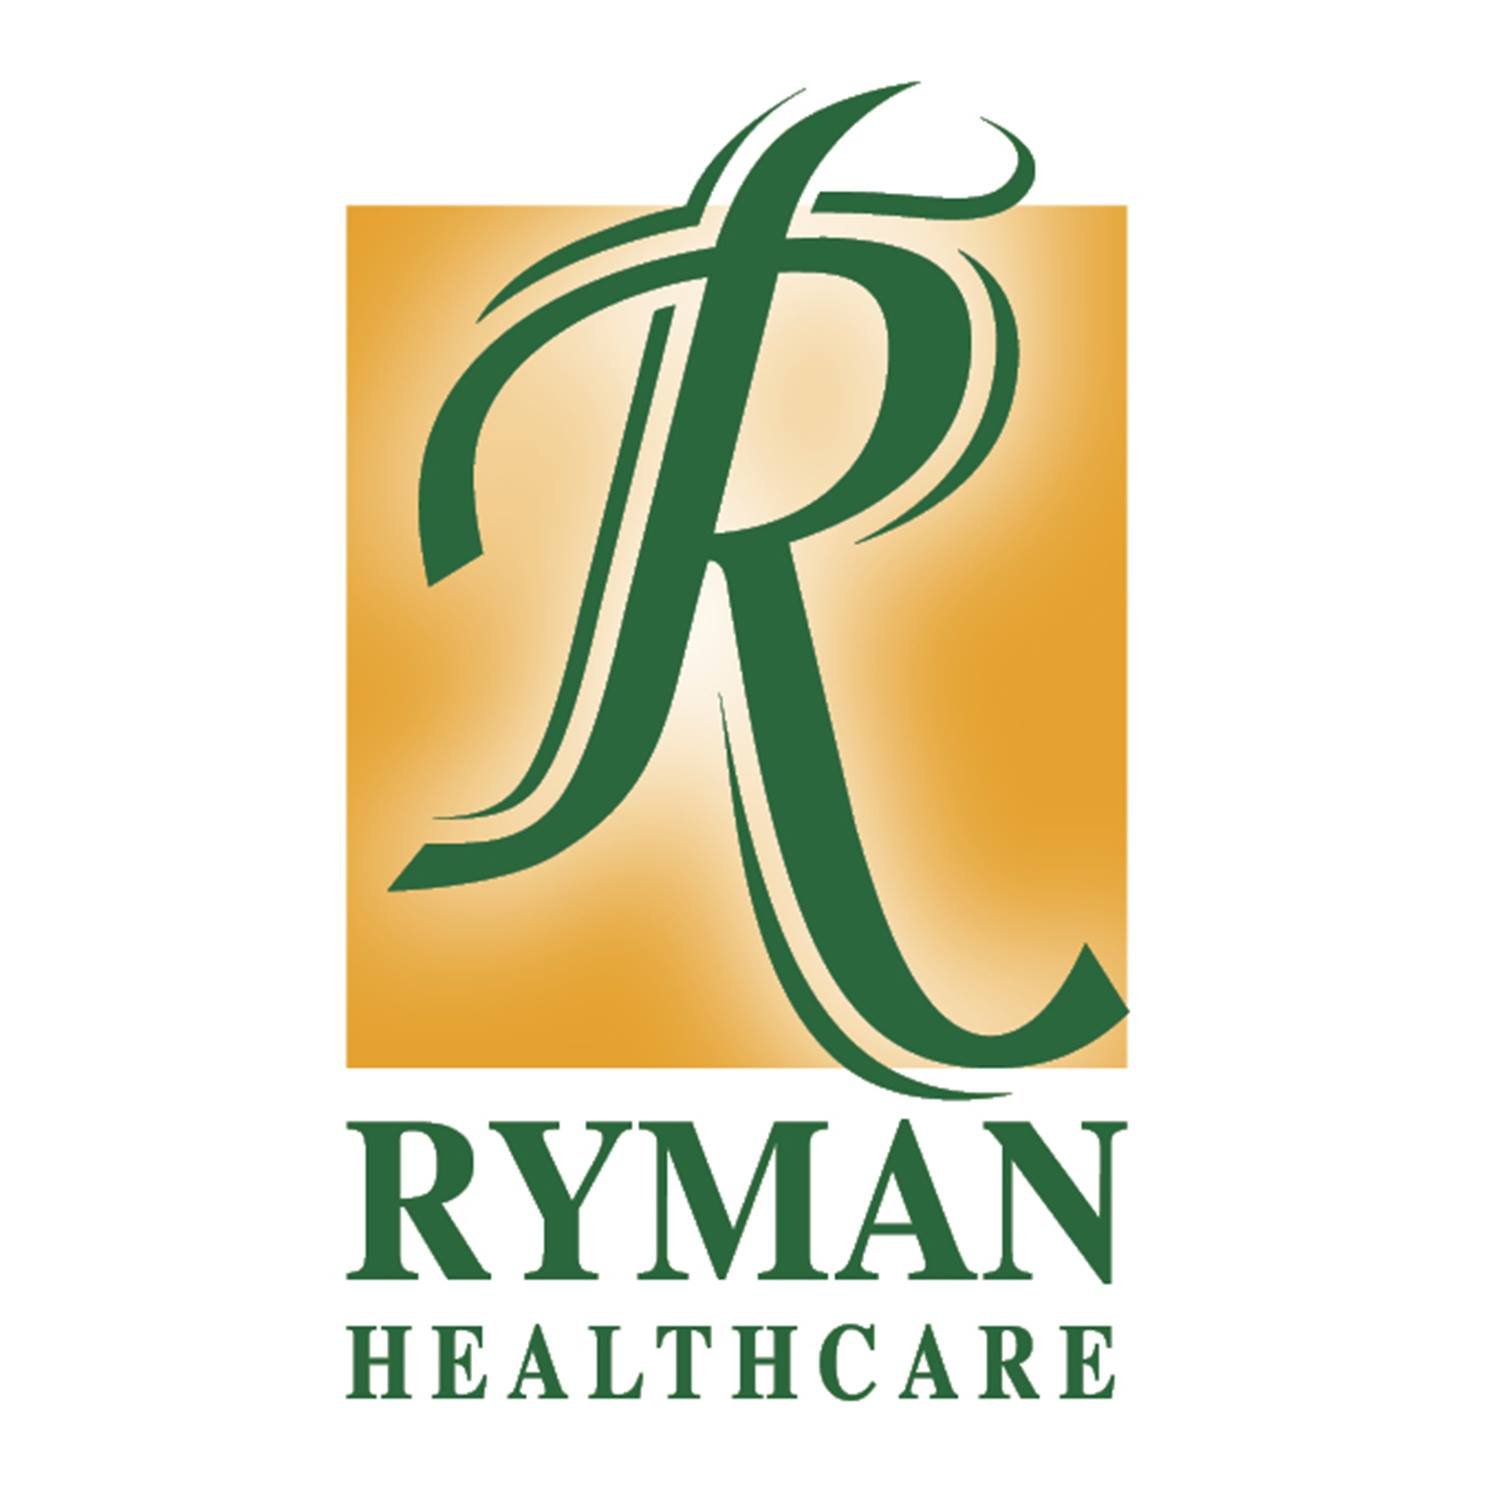 Ryman Healthcare offers the very best of retirement living and care.